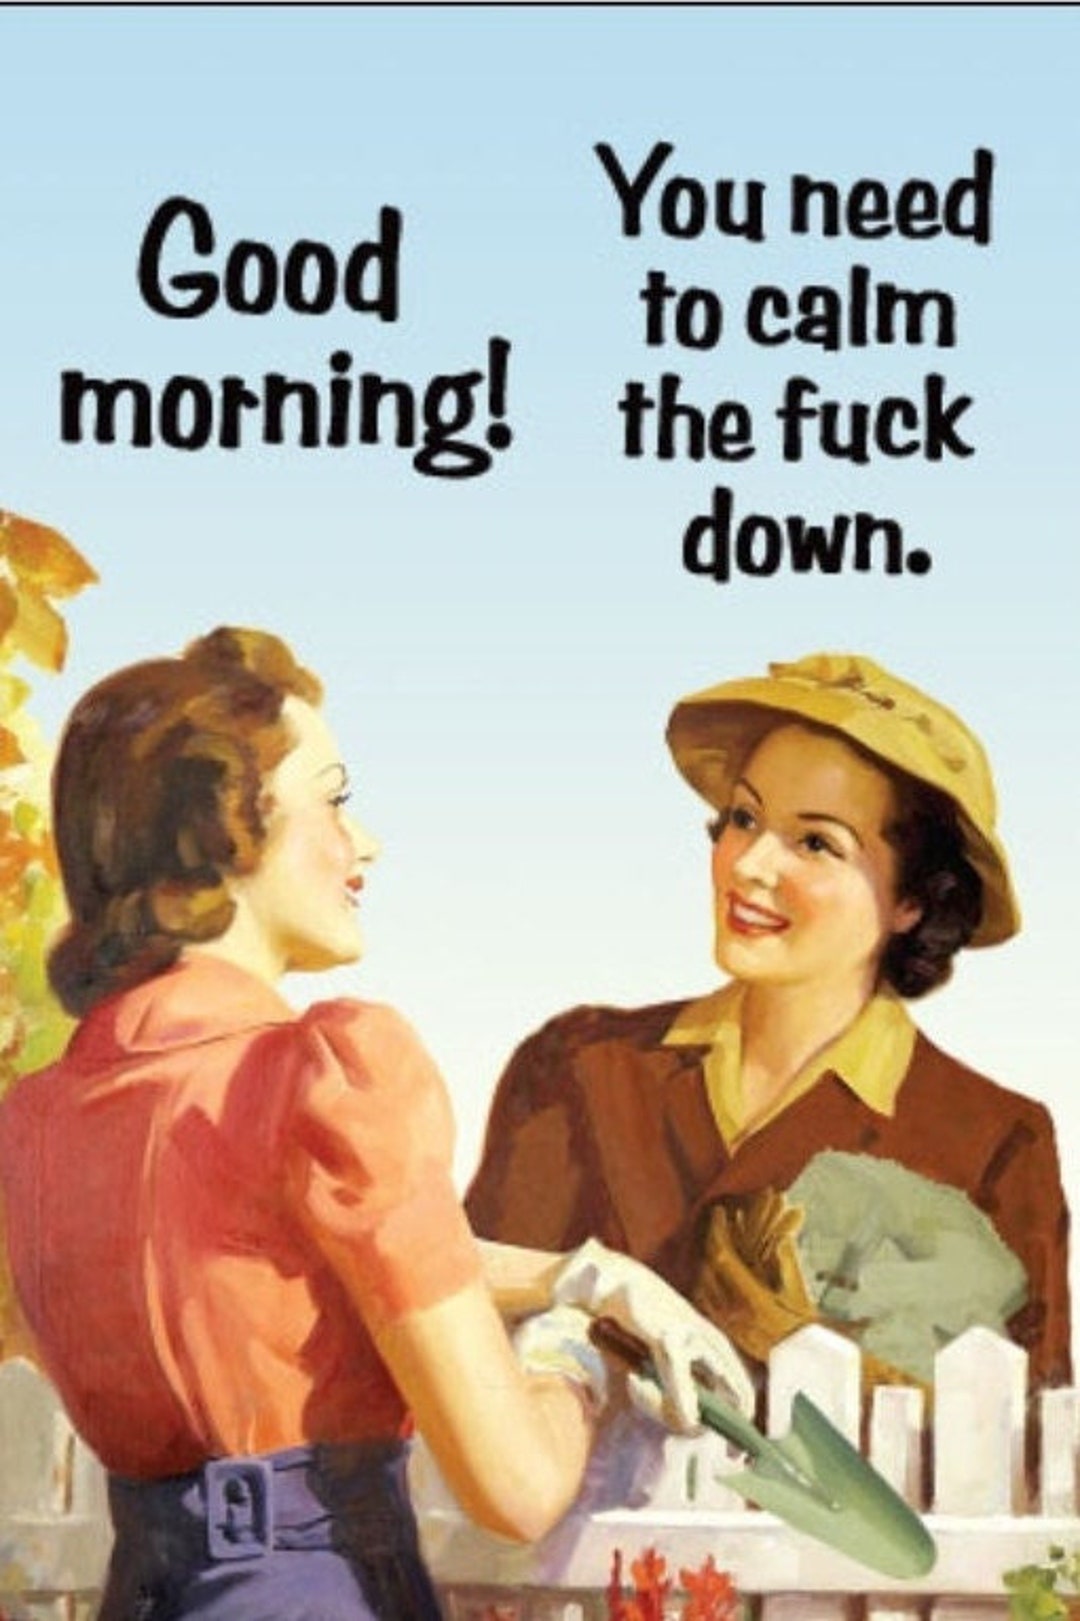 Good Morning You Need to Calm the Fuck Down a Funny 2x3 - Etsy Norway